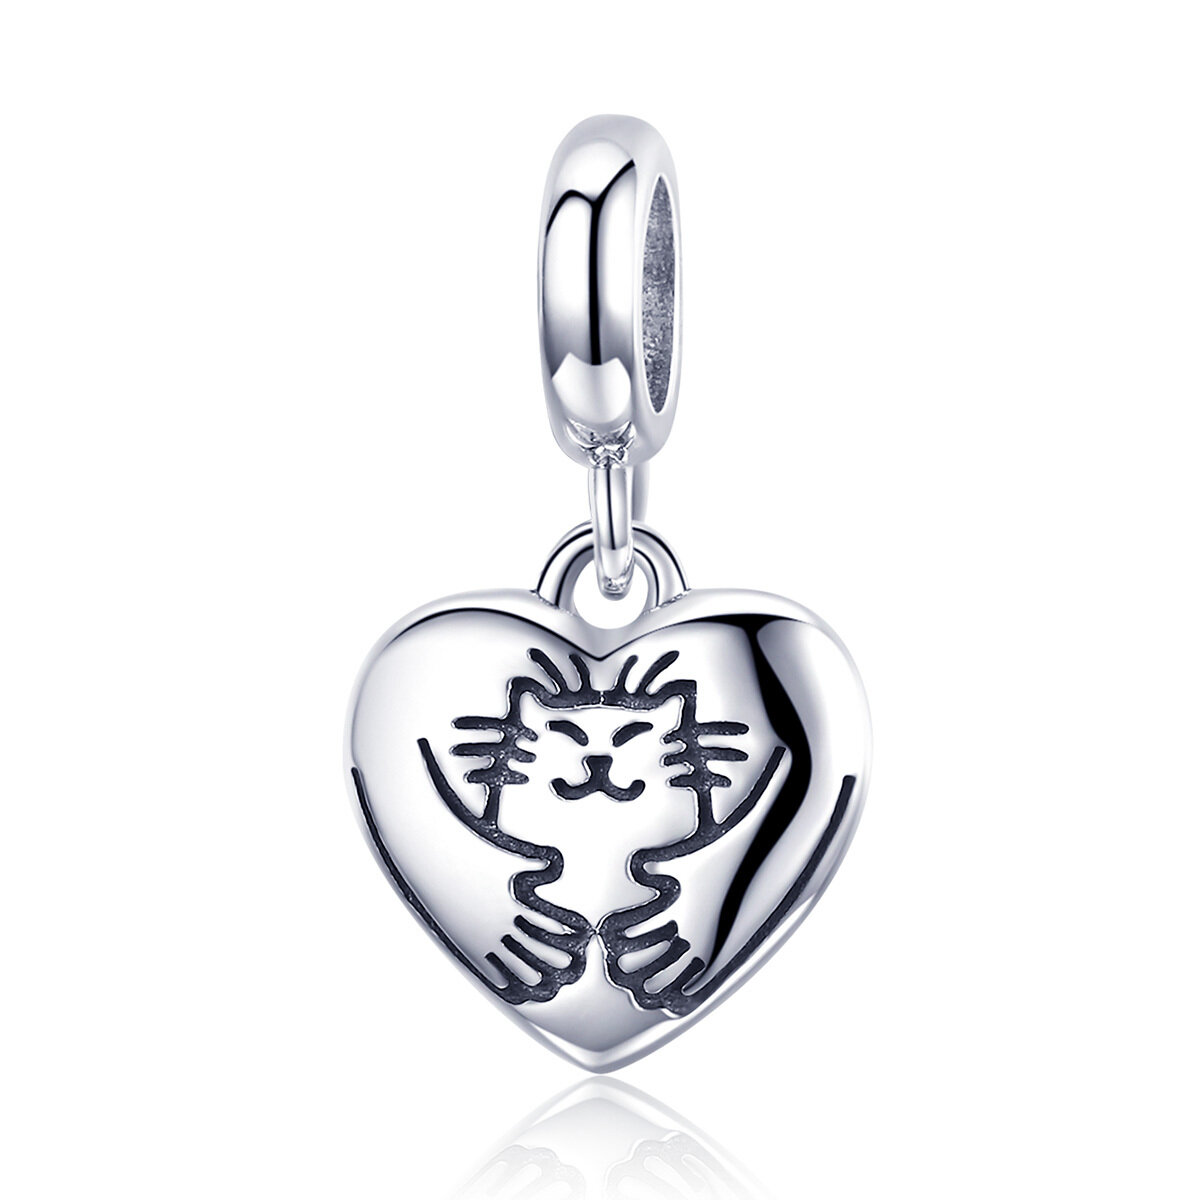 GemKing SCC955 Kitty's Love S925 Sterling Silver Charm